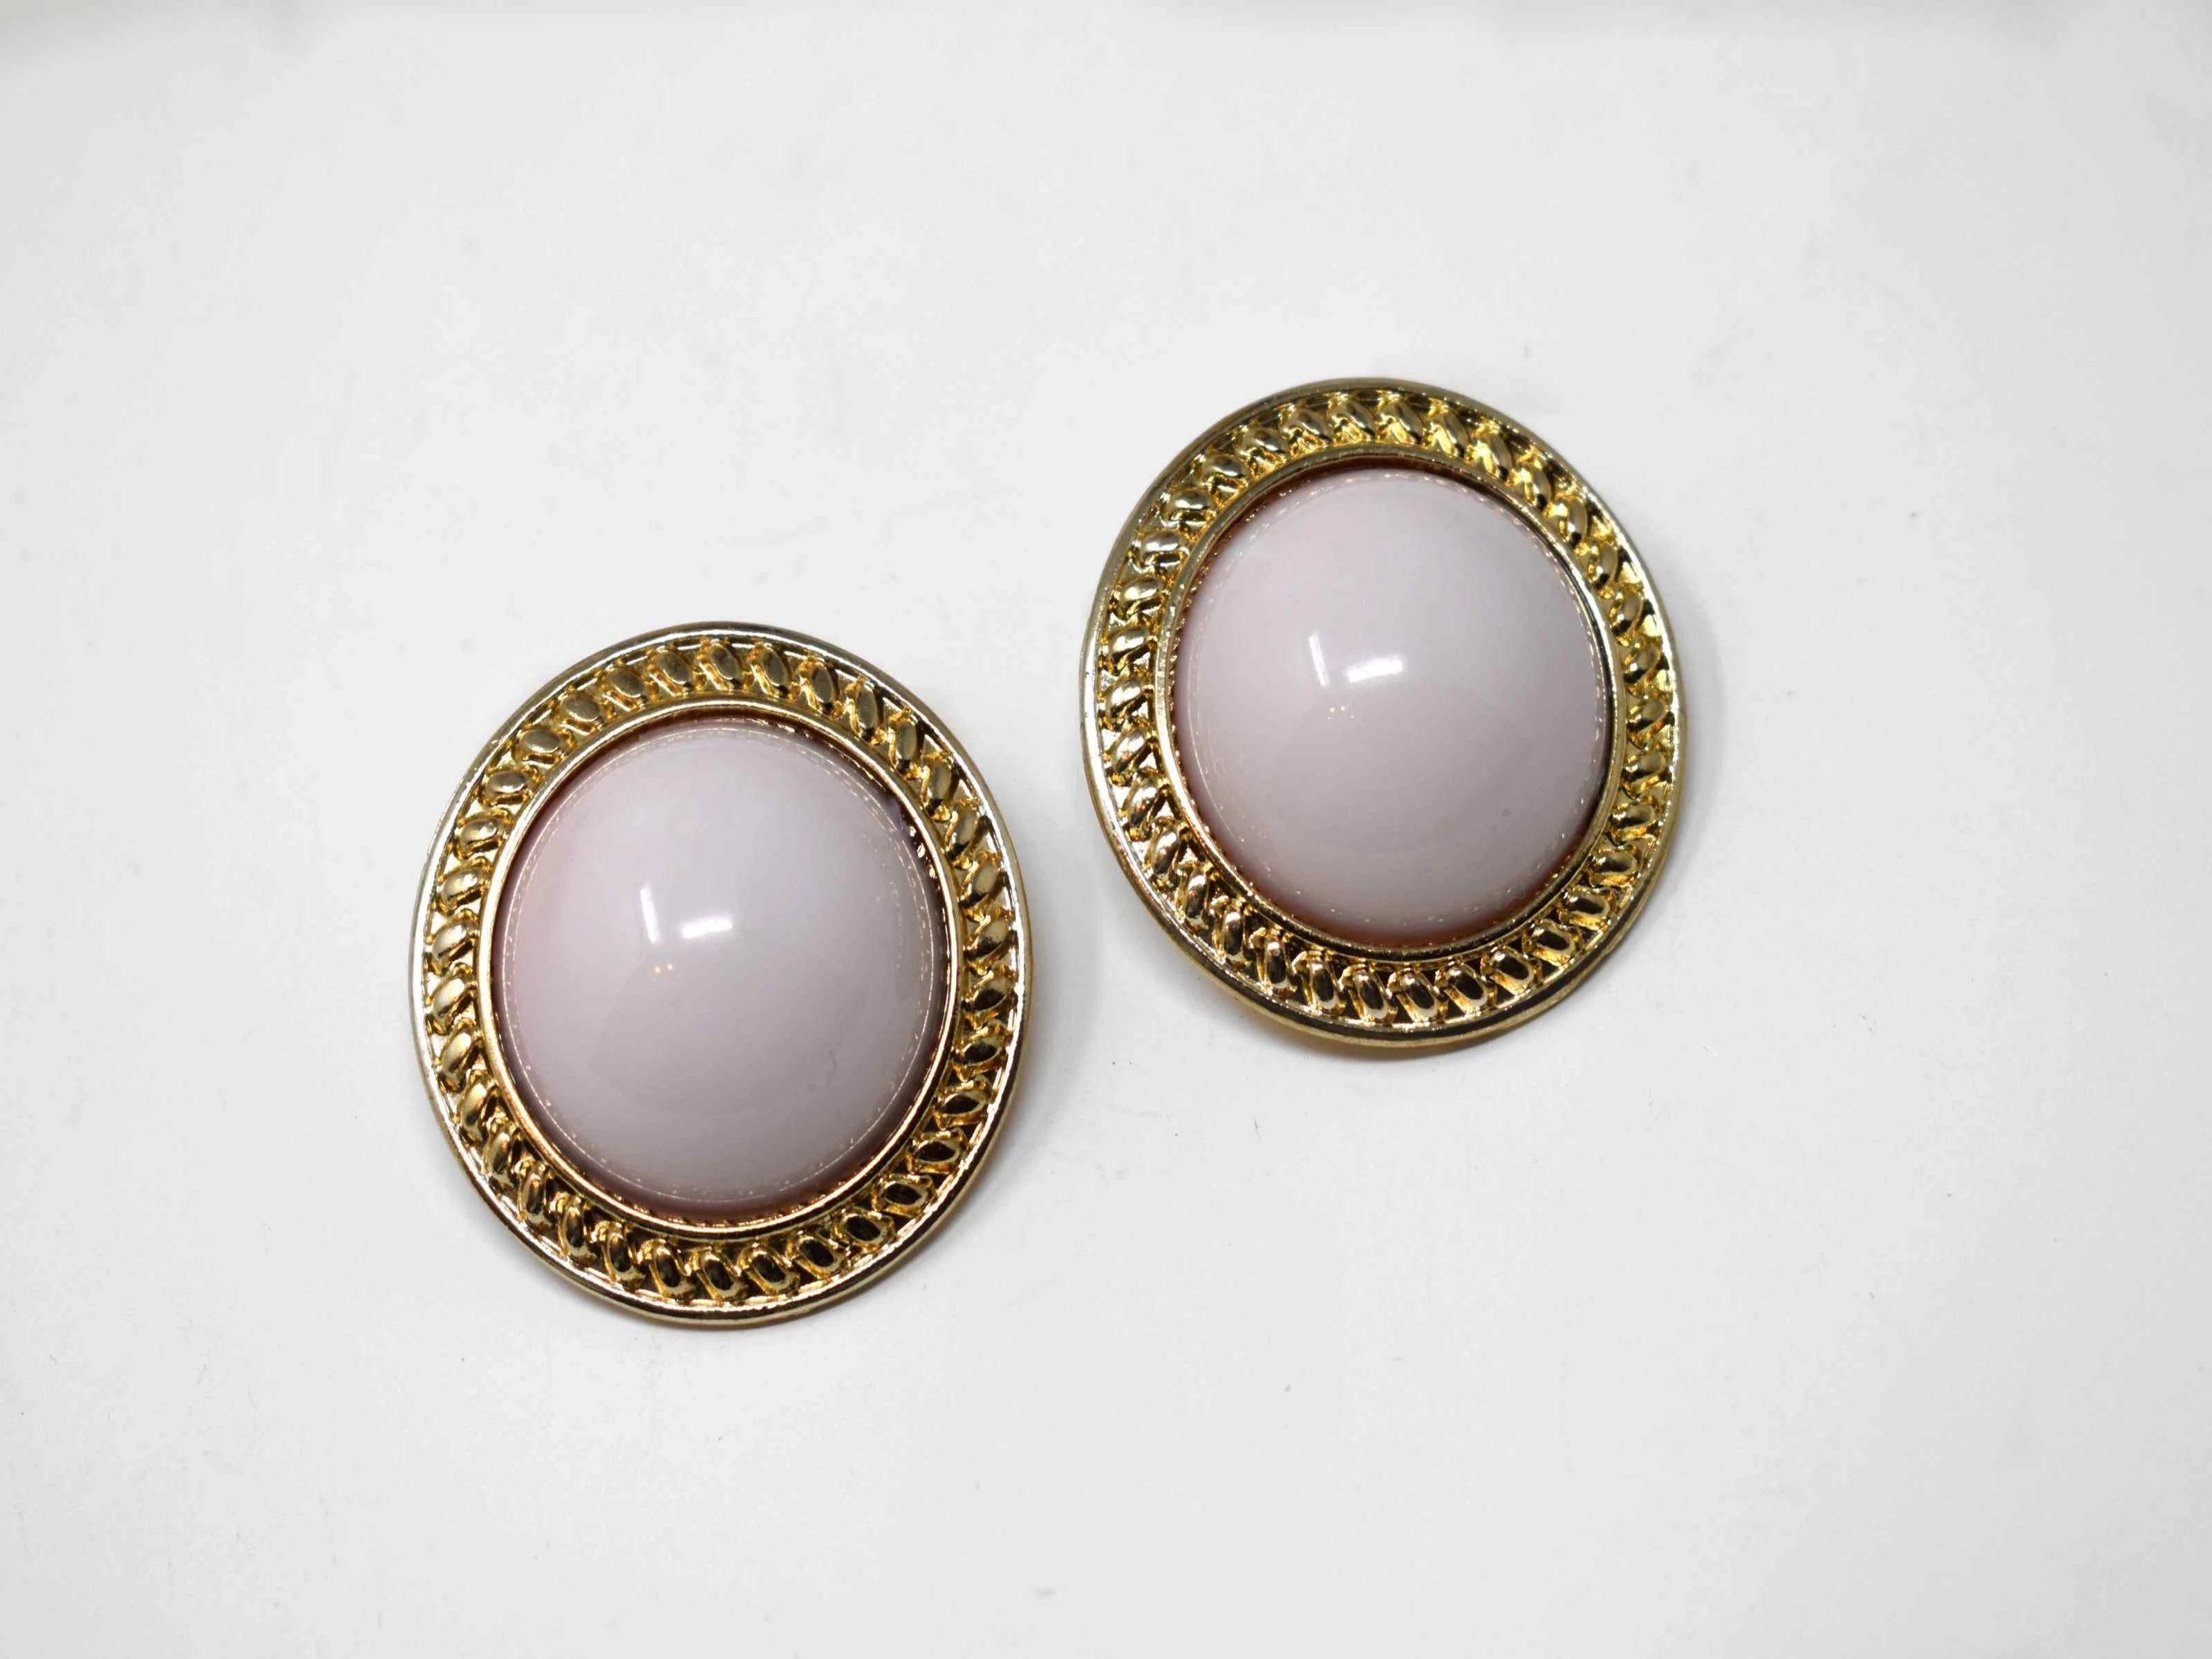 Make a classic statement in our pink Alstro earrings. These oversized knob earrings have a beautiful gold trim and a pushback clasp.